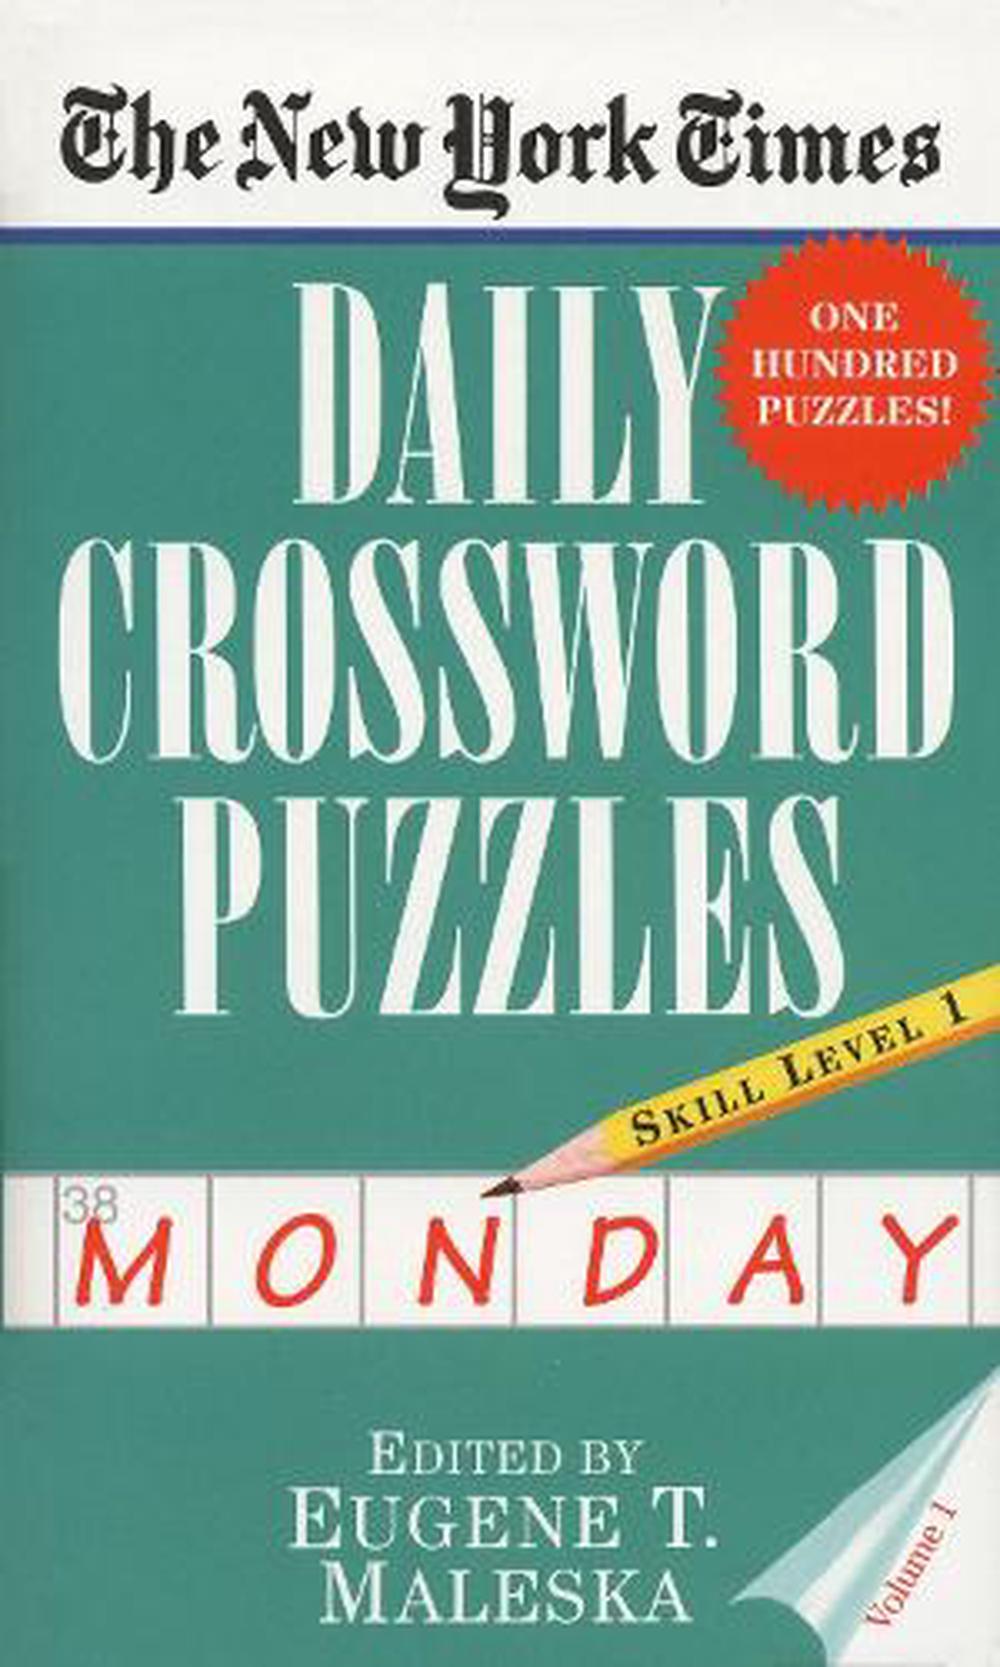 The New York Times Daily Crossword Puzzles (Monday), Volume I by Eugene